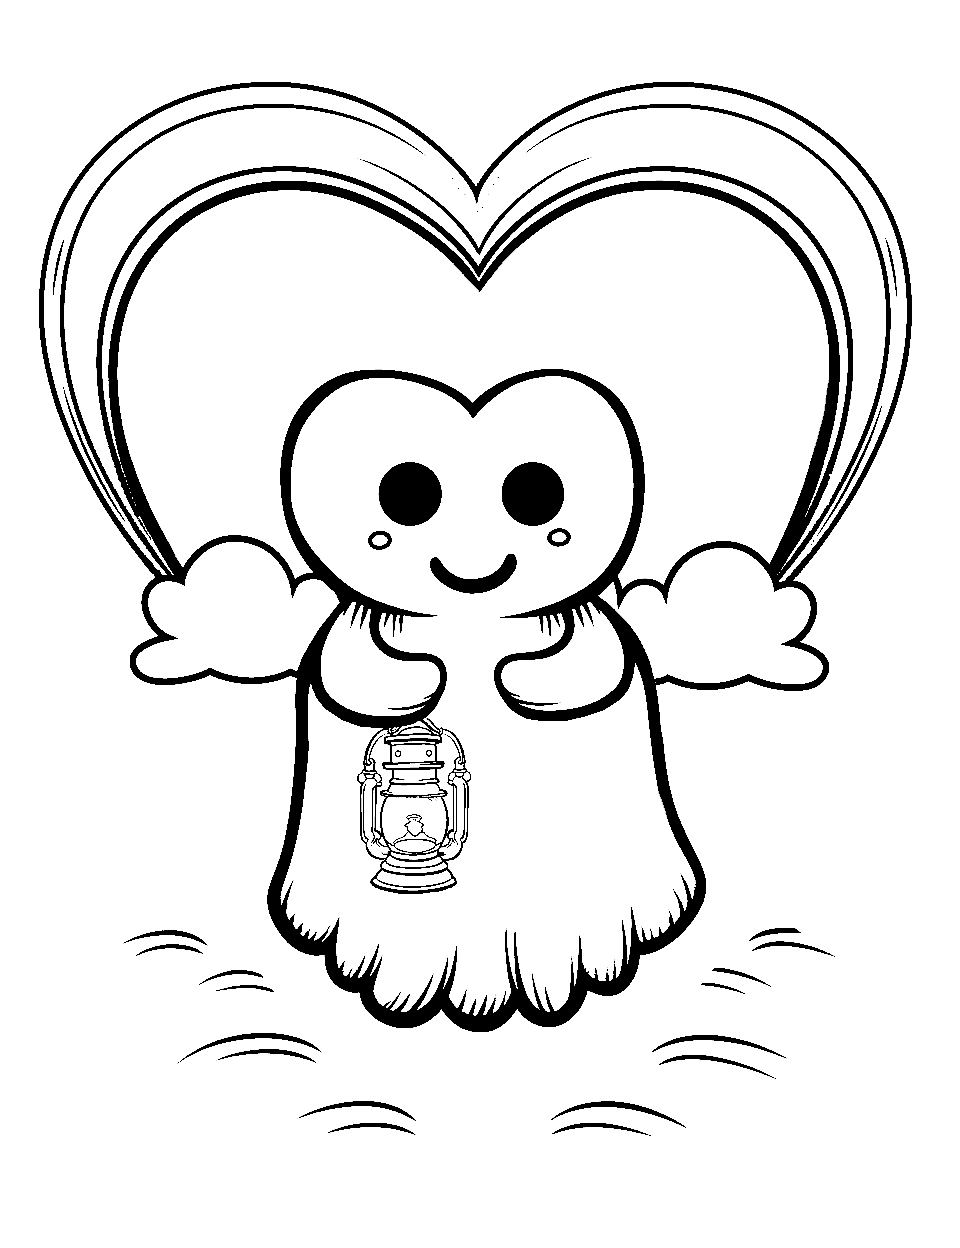 Friendly Ghost Coloring Page - A ghost floating with a lantern and oozing heart-shaped smoke behind.